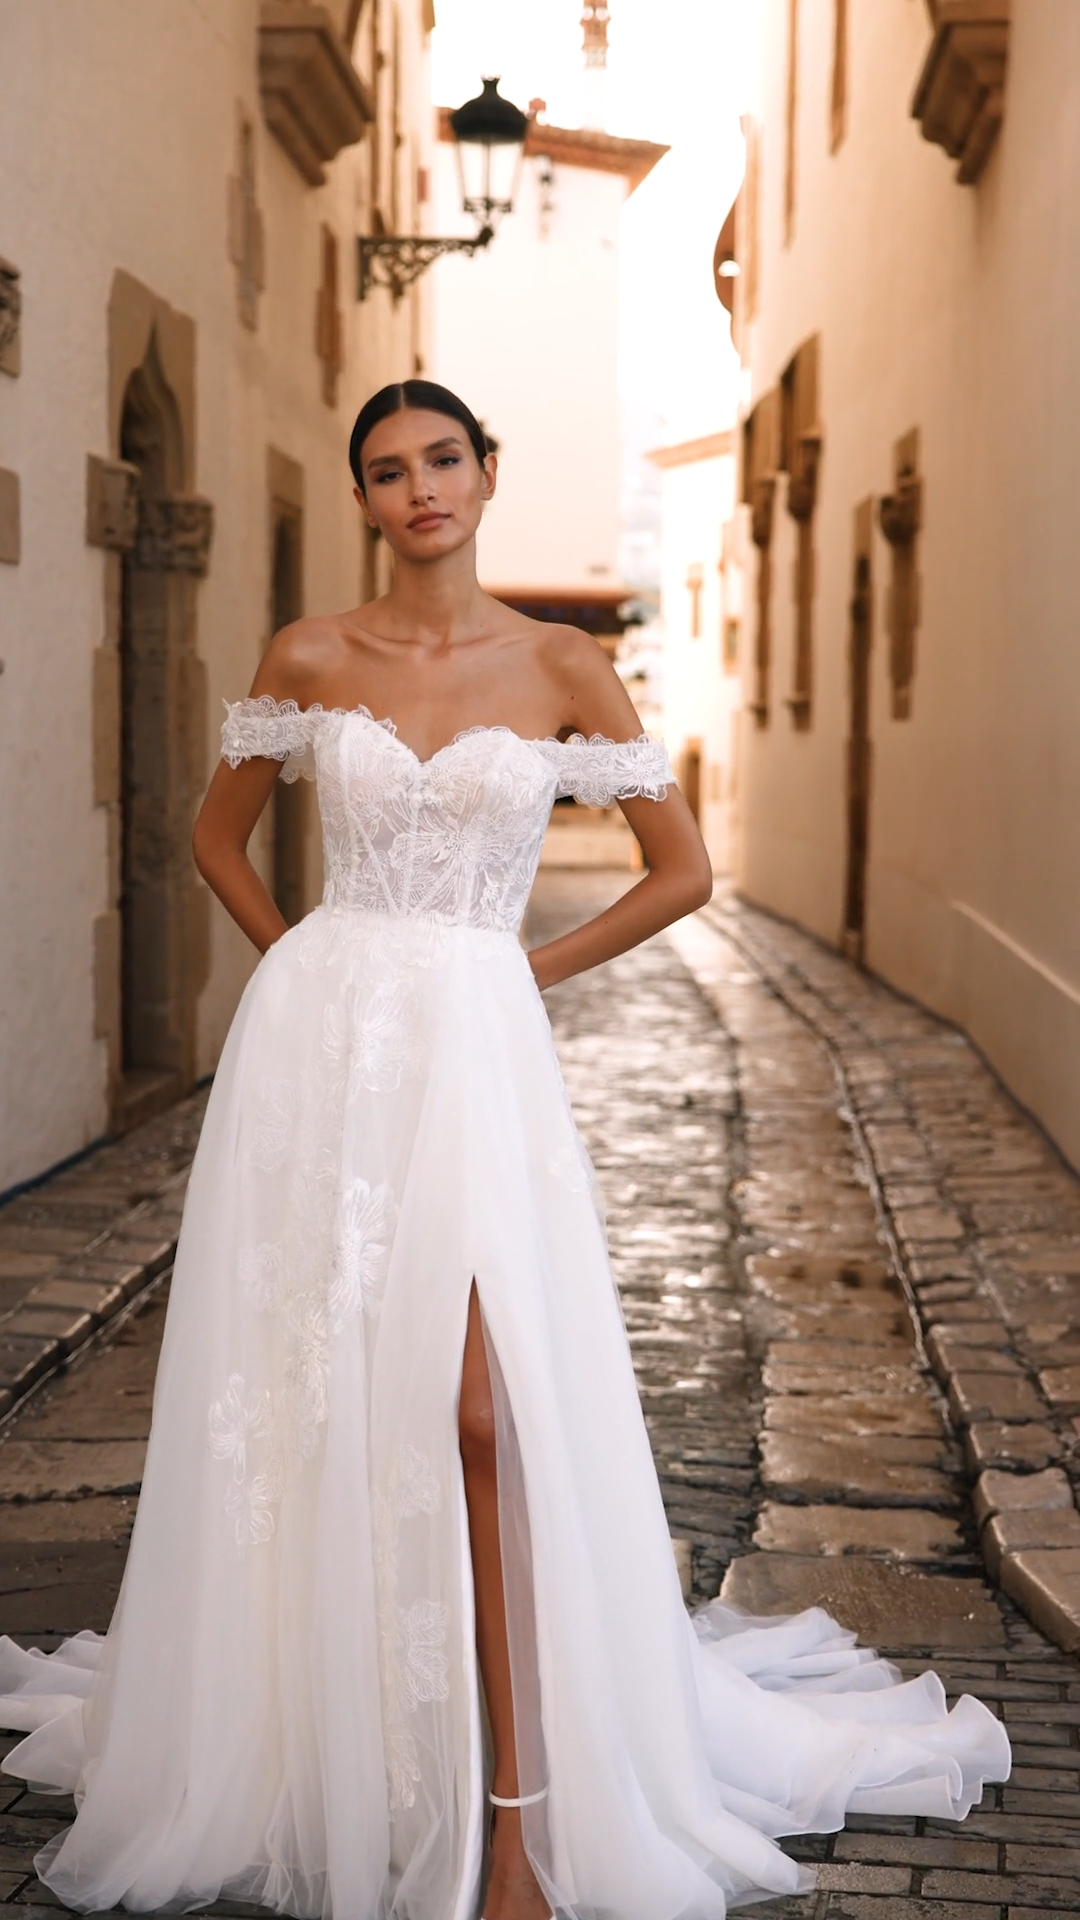 Enchanting Floral Lace Full A-Line Wedding Gown with Leg Slit and Swag Sleeves